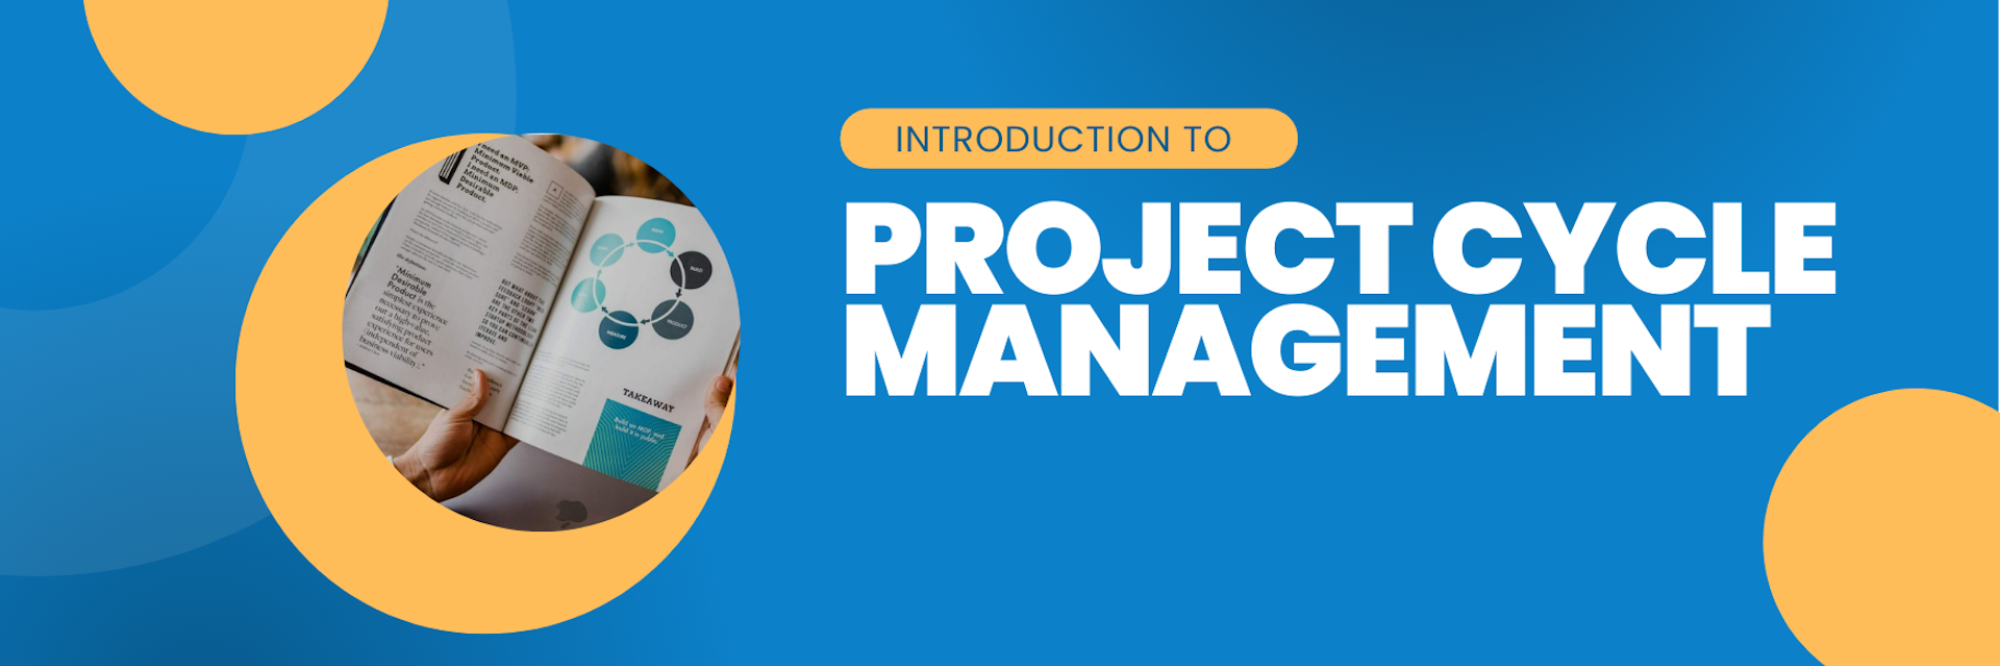 Introduction to Project Cycle Management